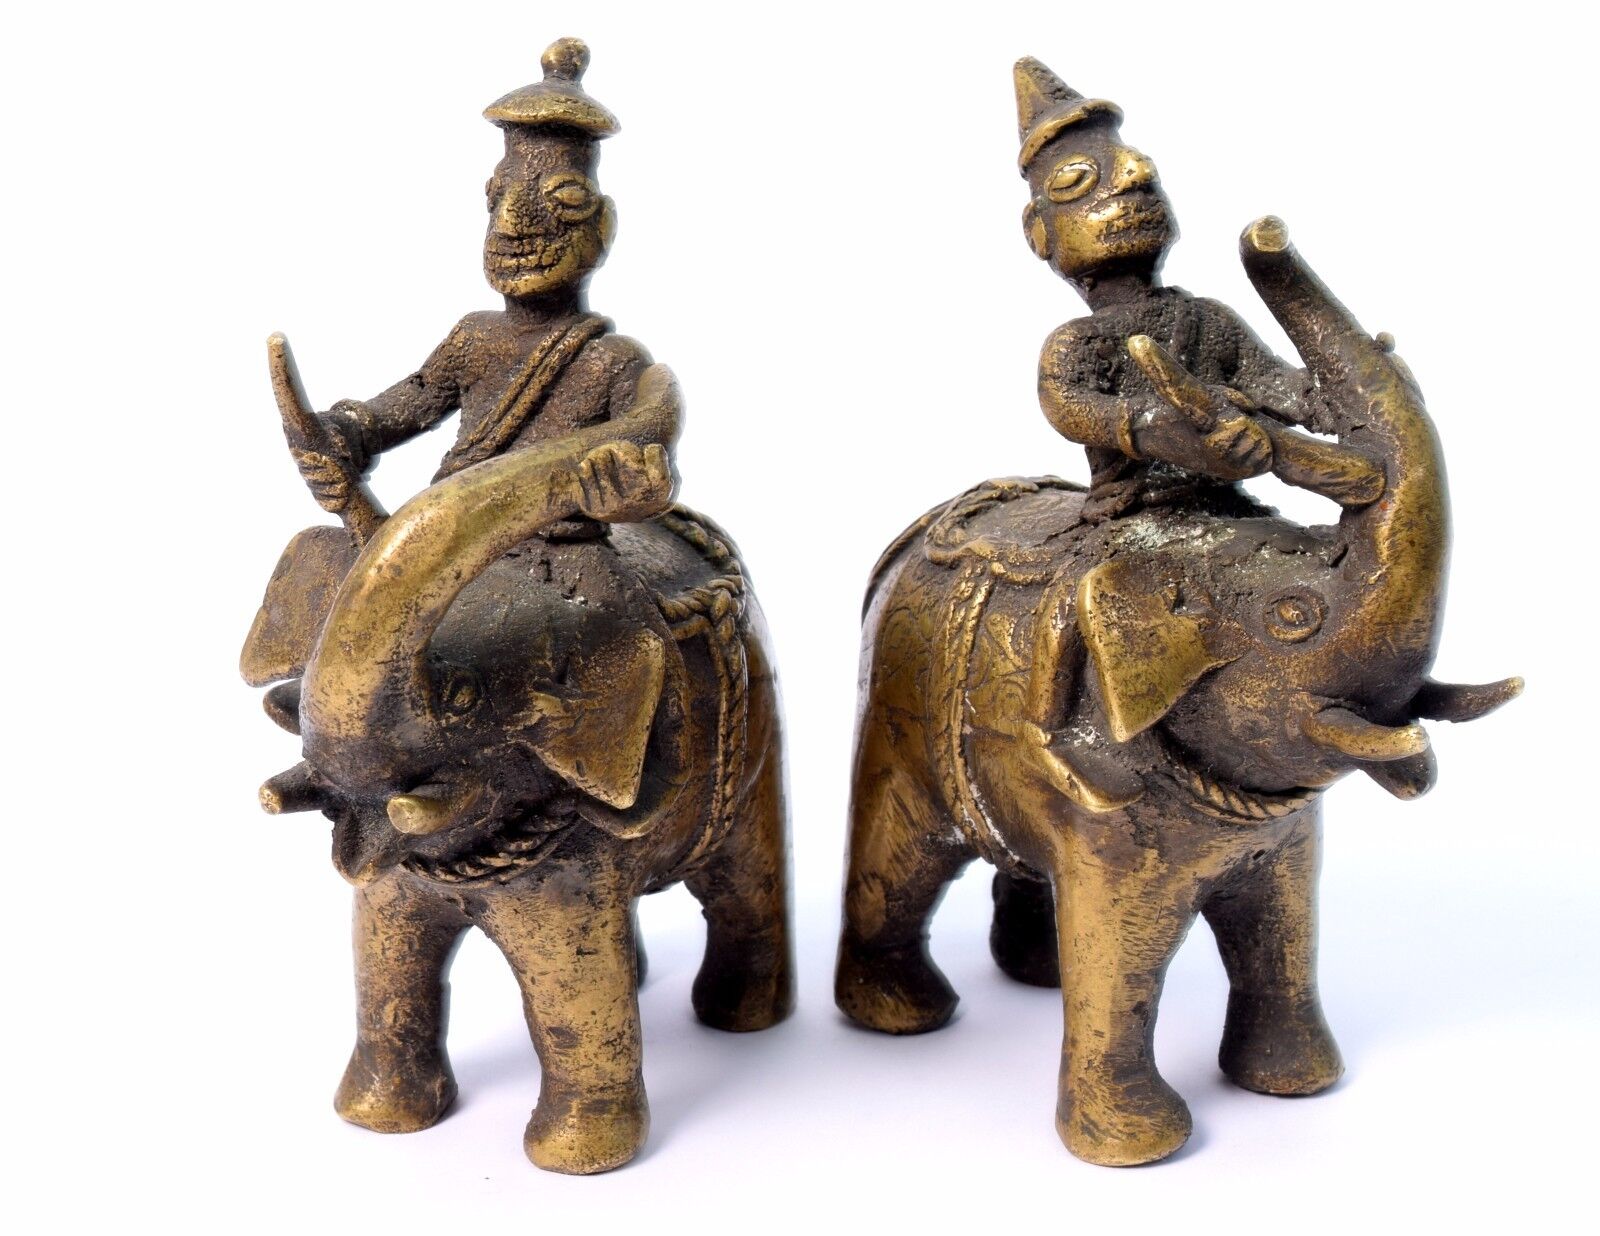 Pair of Vintage Handcrafted elephant with warrior rider figures Decor. G7-703 